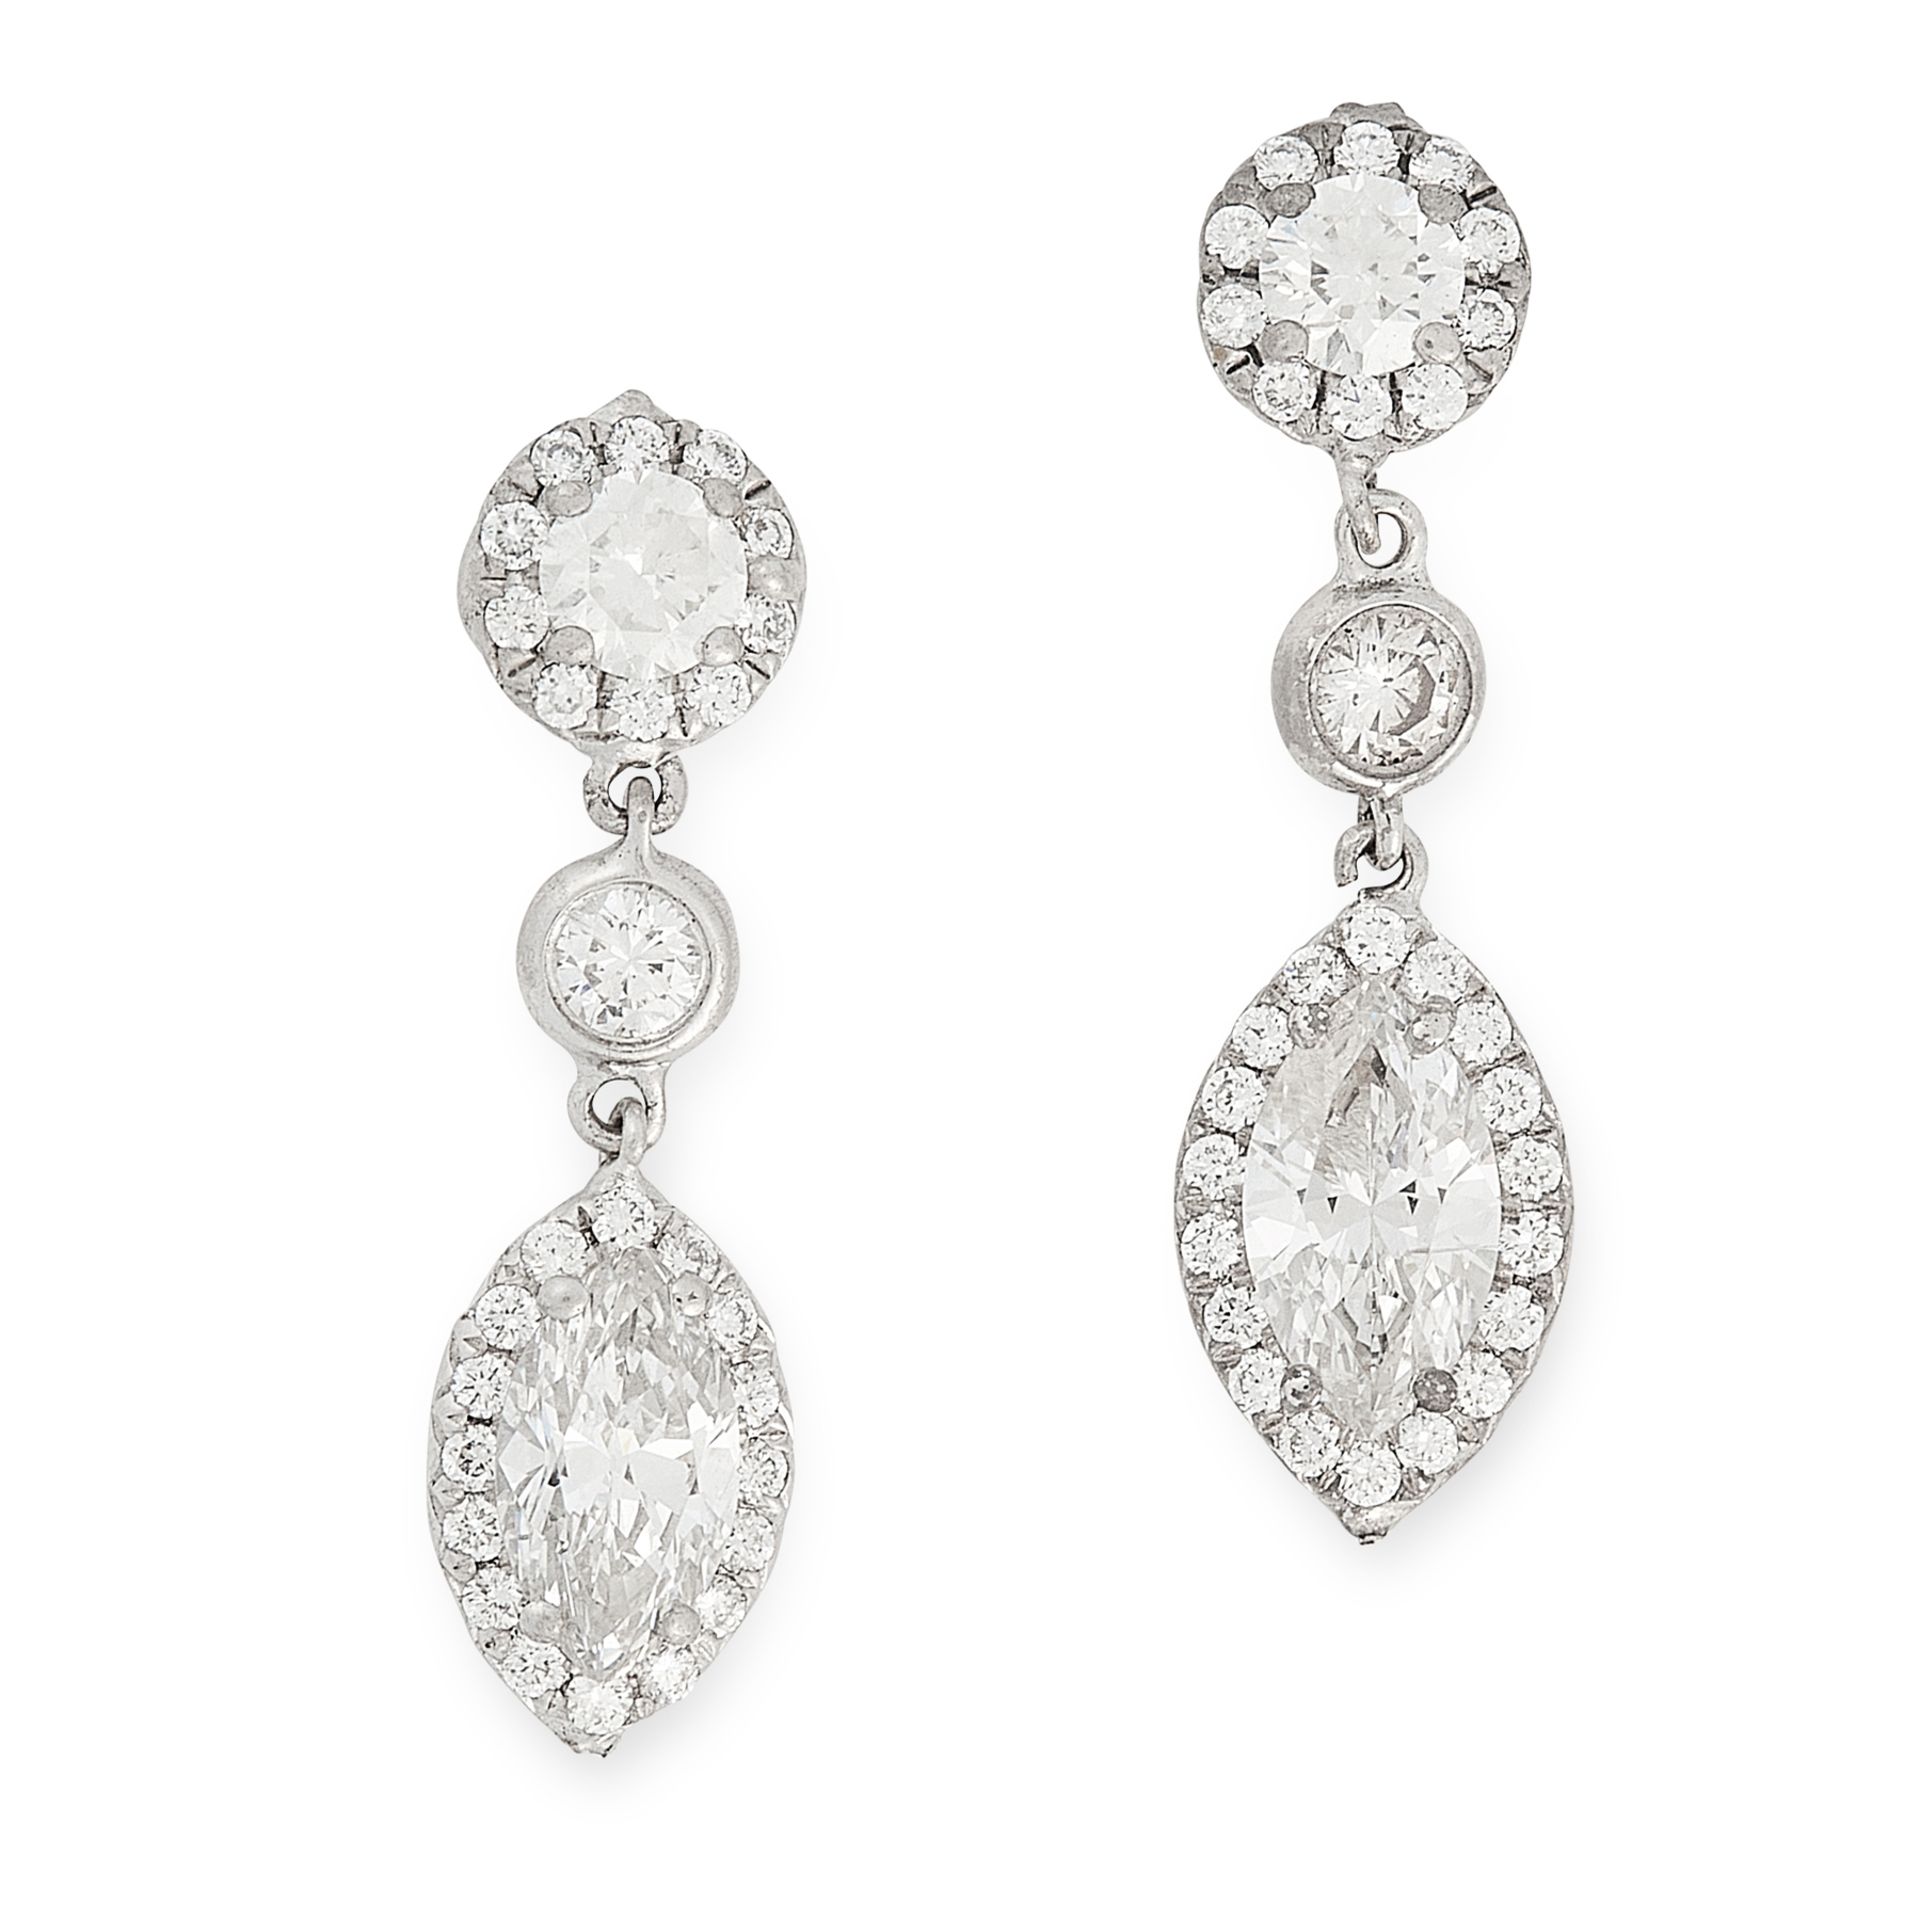 A PAIR OF DIAMOND DROP EARRINGS in 18ct white gold, each set with a marquise cut diamond of 0.55 and